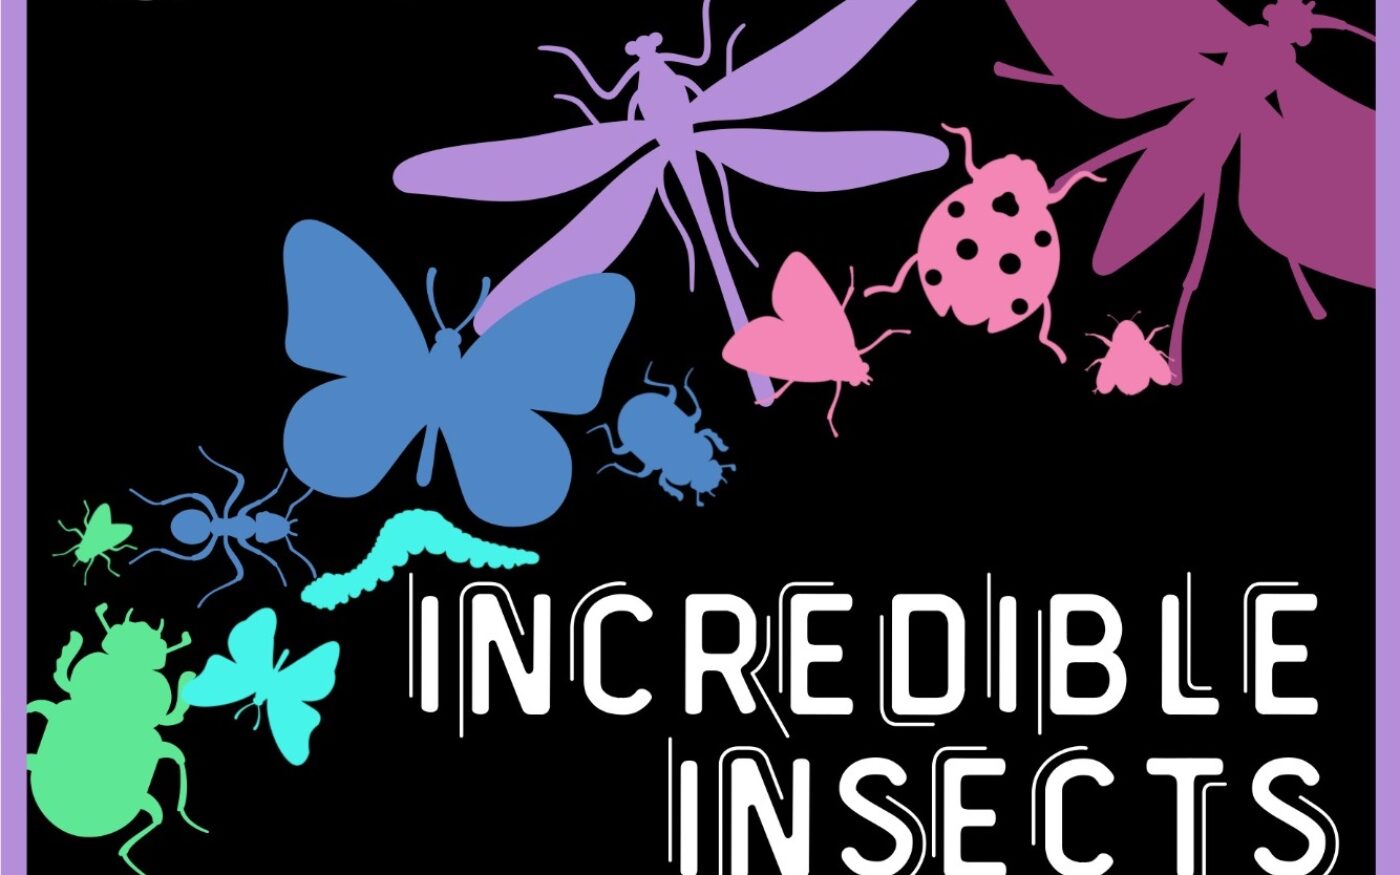 Incredible Insects badge design